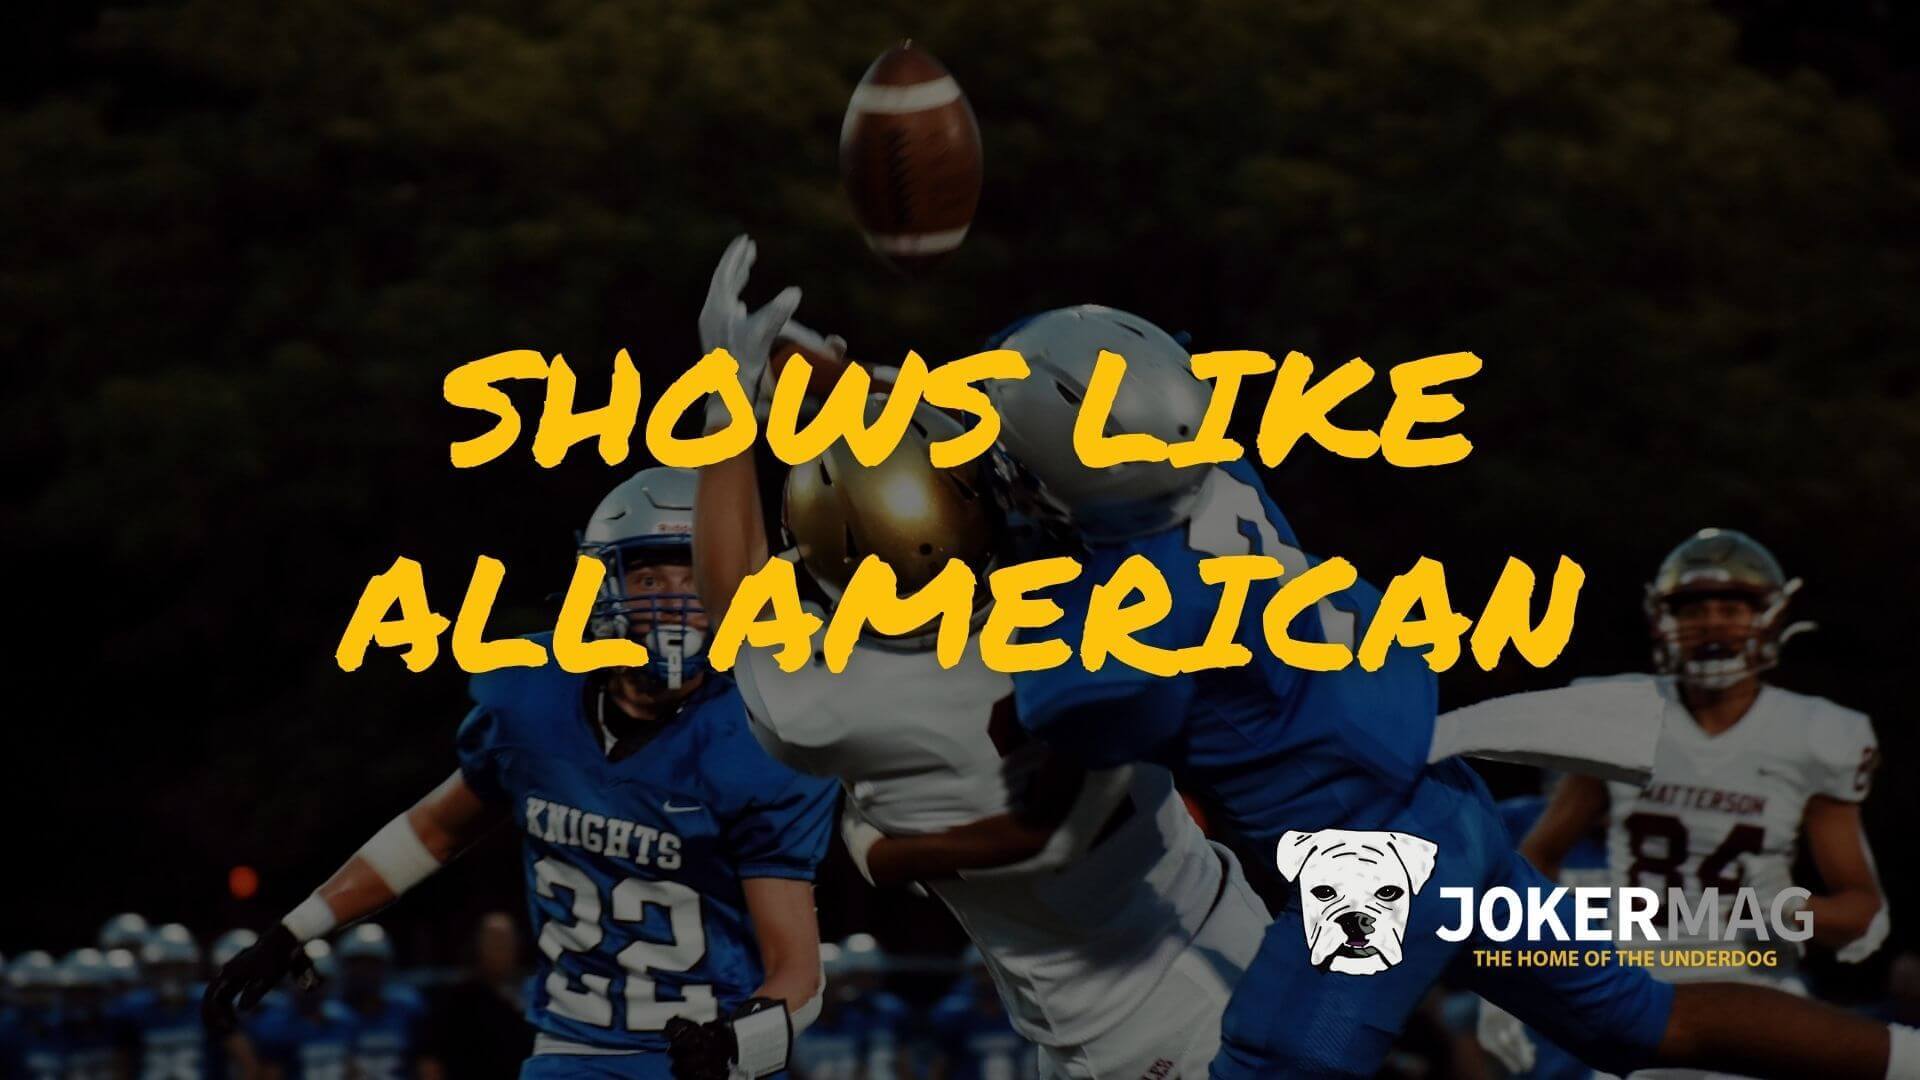 Here are 7 shows like All American, by Joker Mag the home of inspiring underdog stories in sports